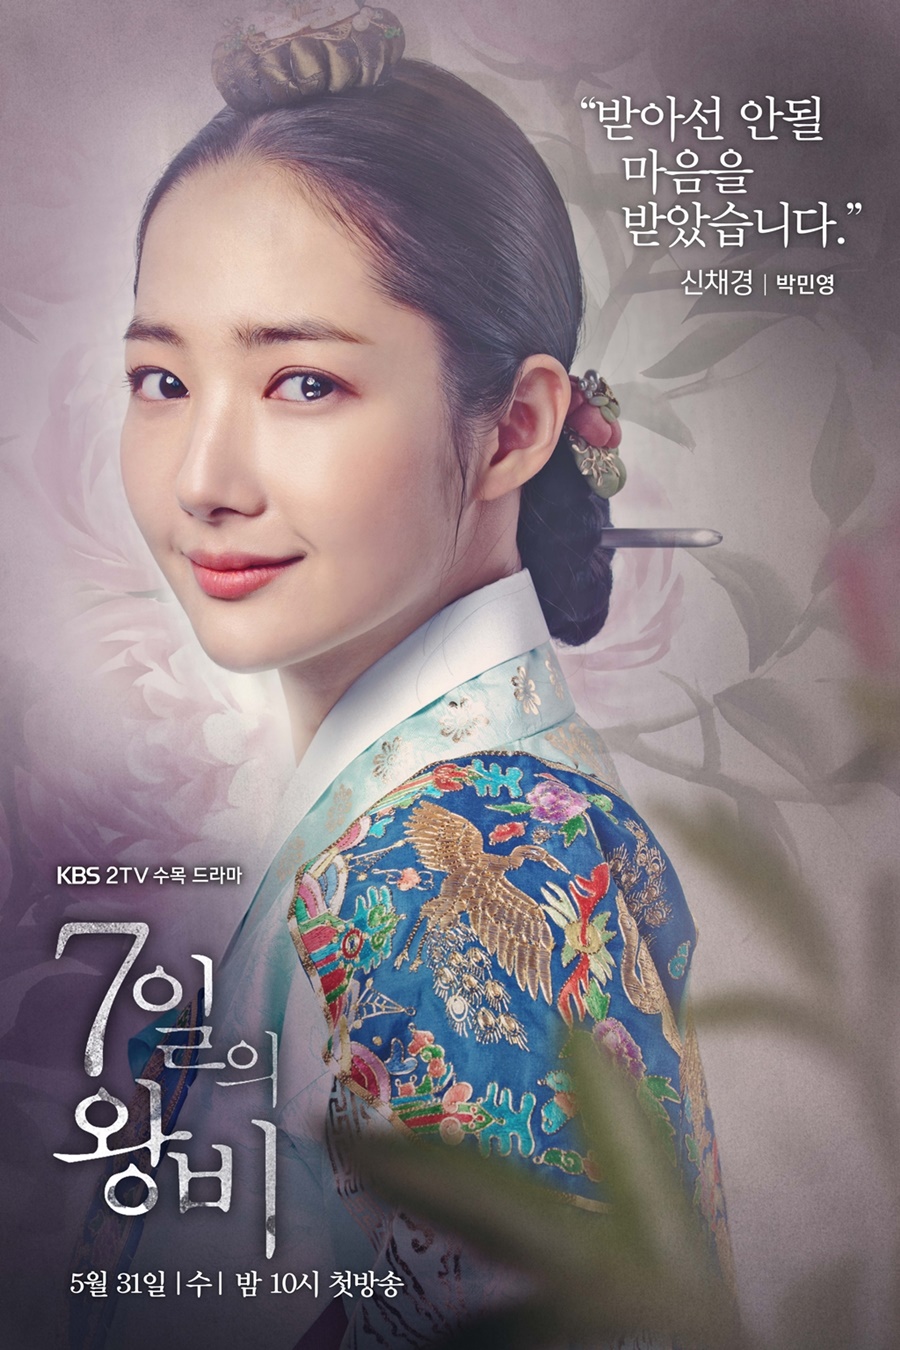 Teaser trailer #3 and character posters for KBS2 drama series “Queen